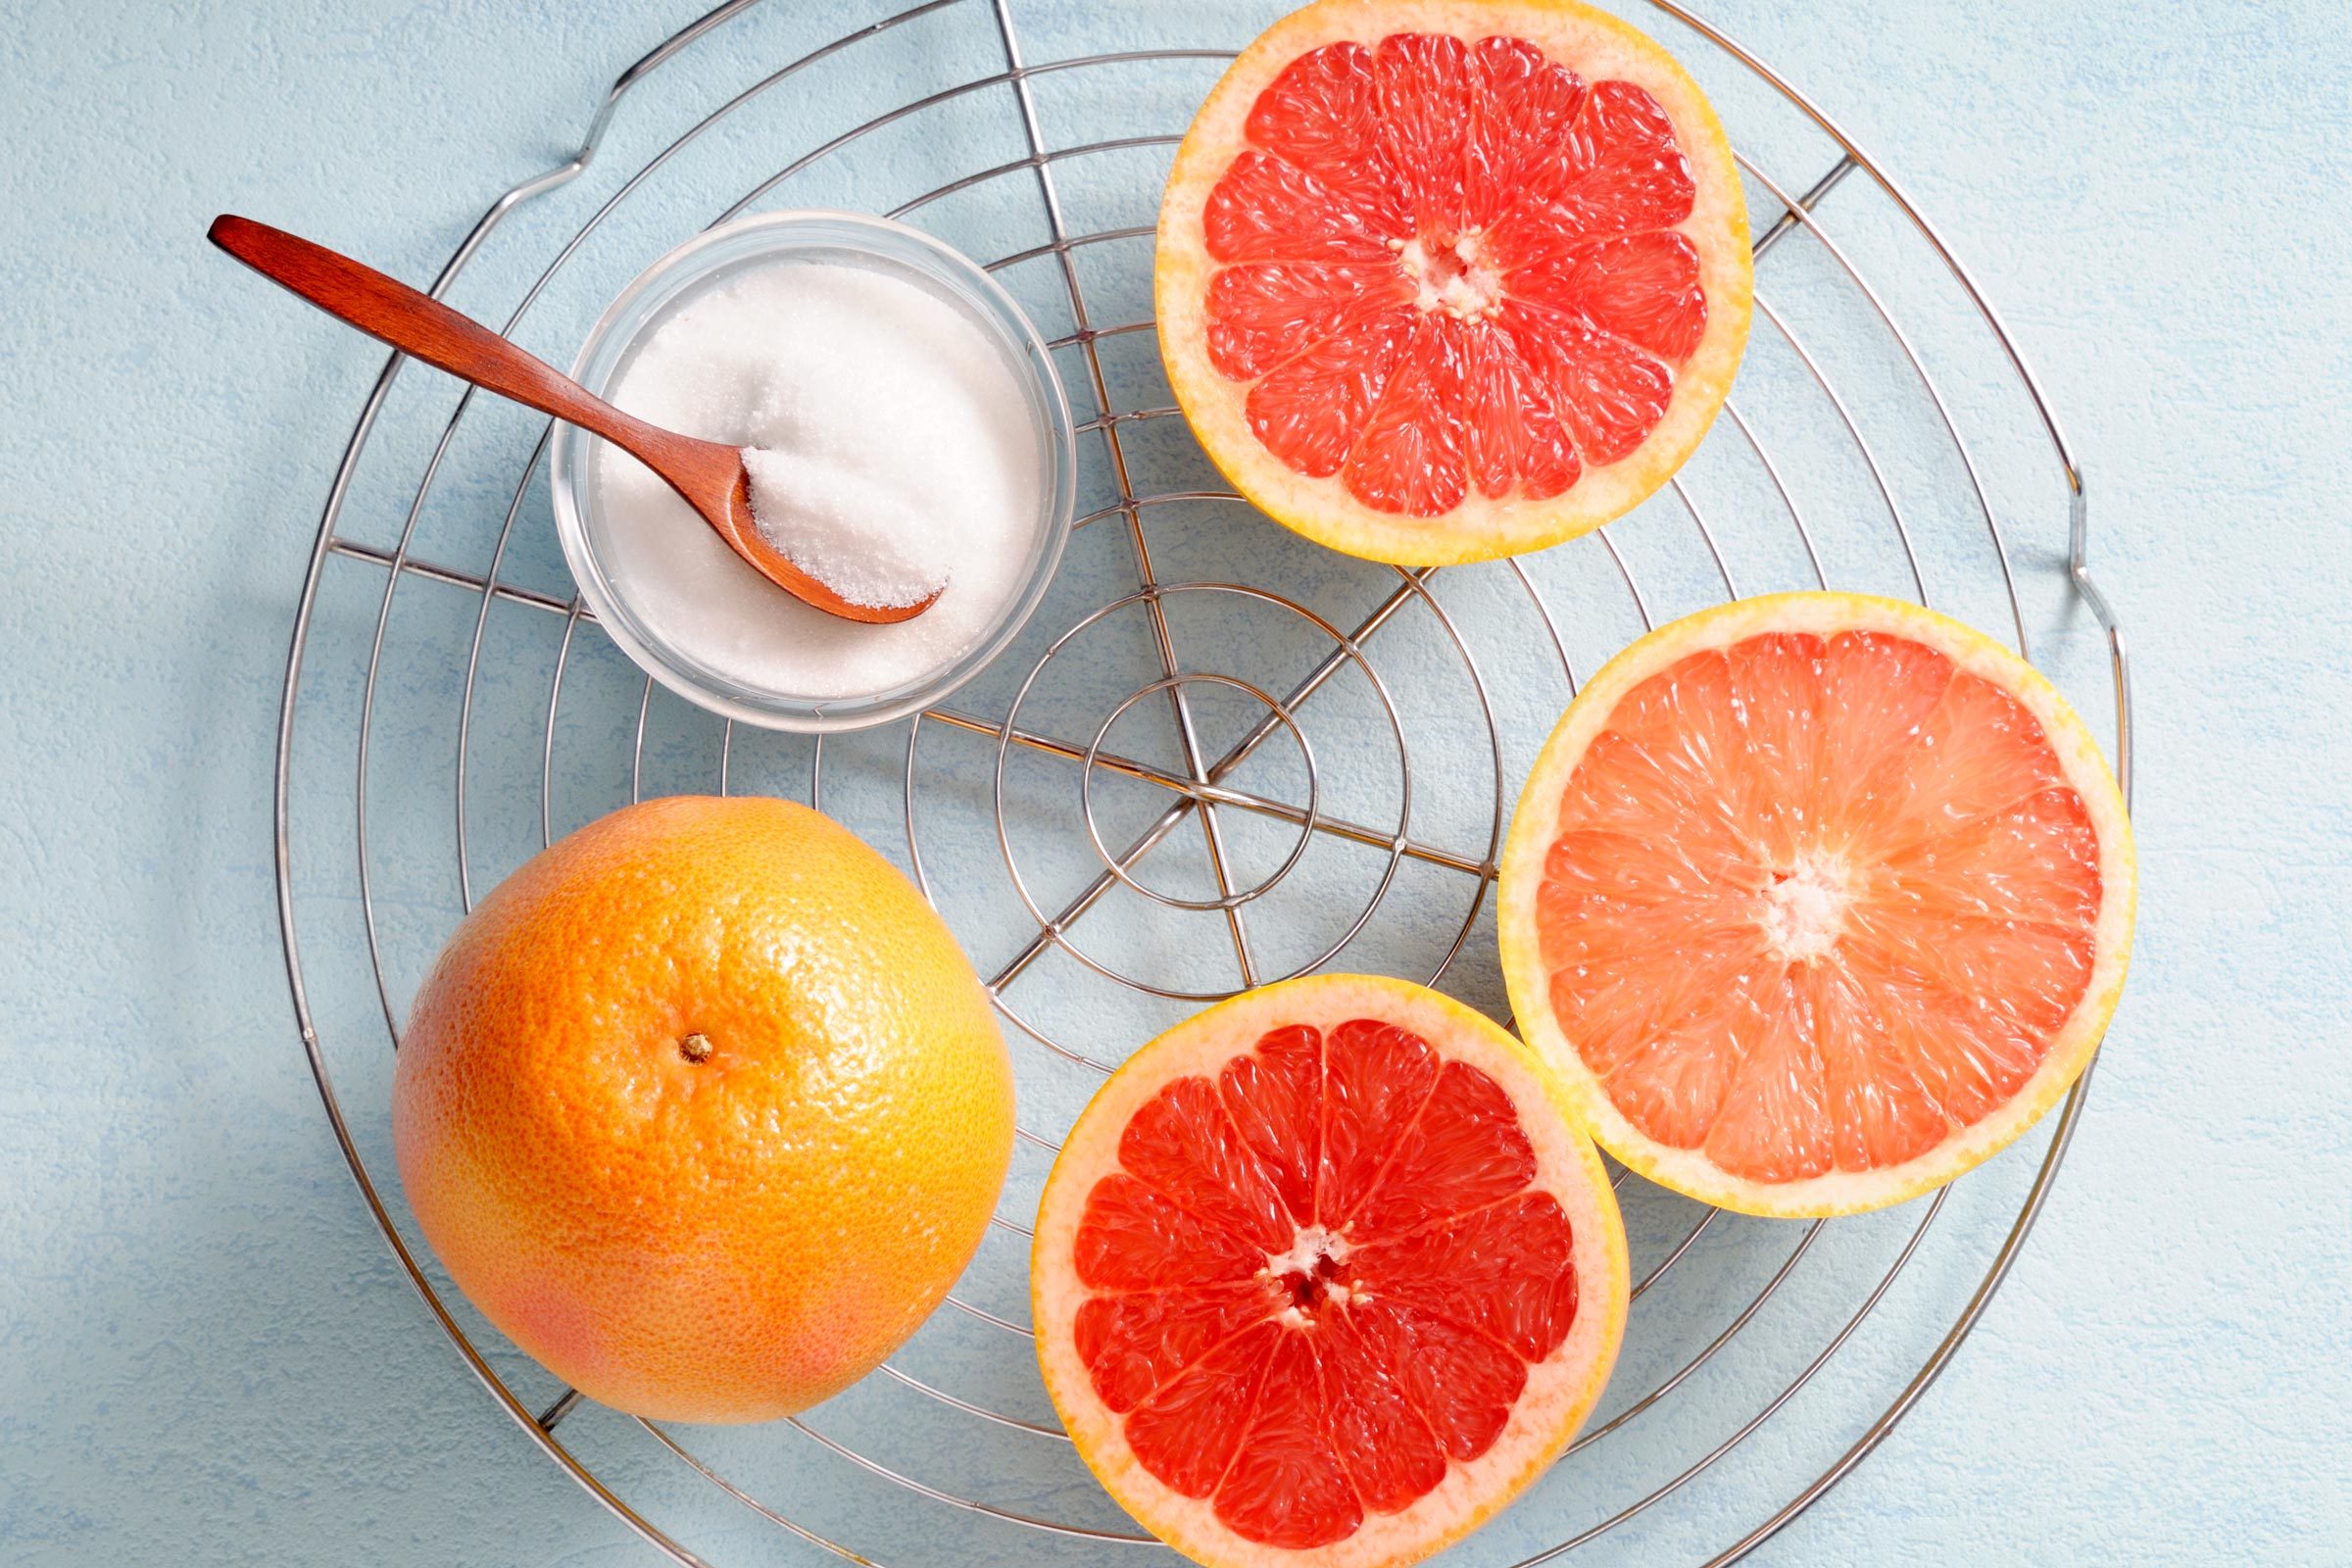 grapefruit and salt for cleaning soap scum